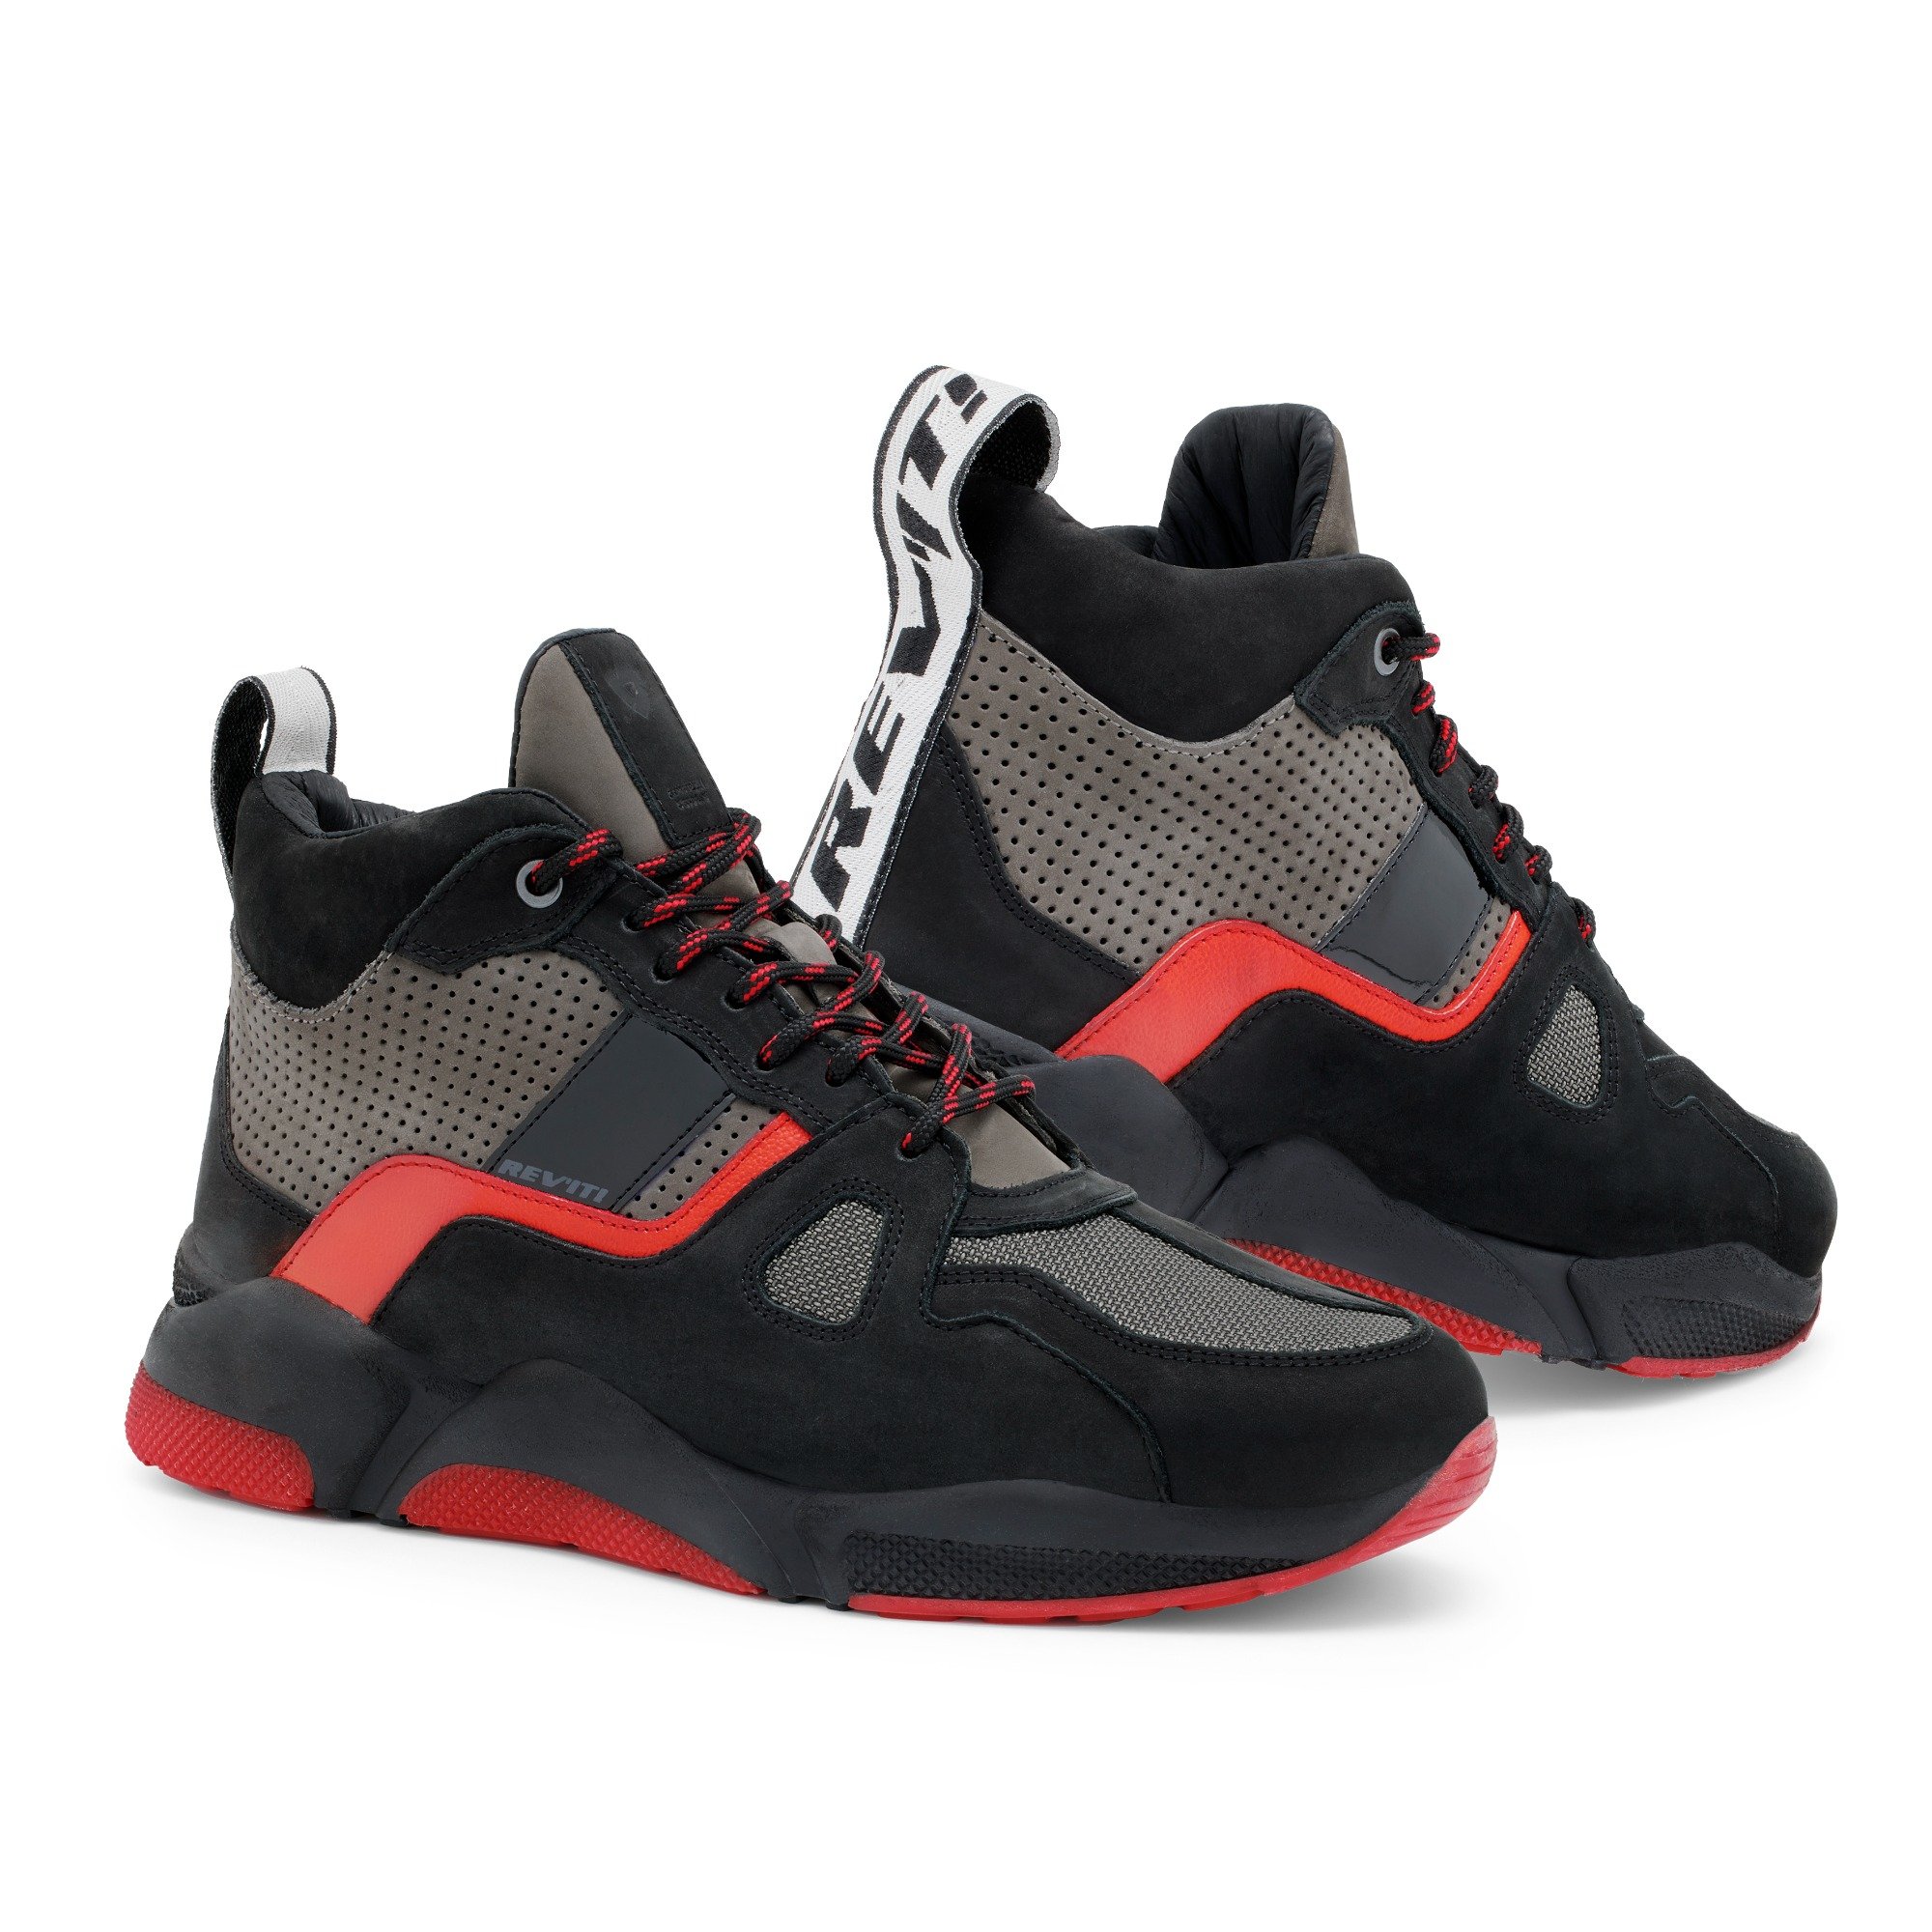 Image of REV'IT! Astro Black Red Size 40 ID 8700001356794